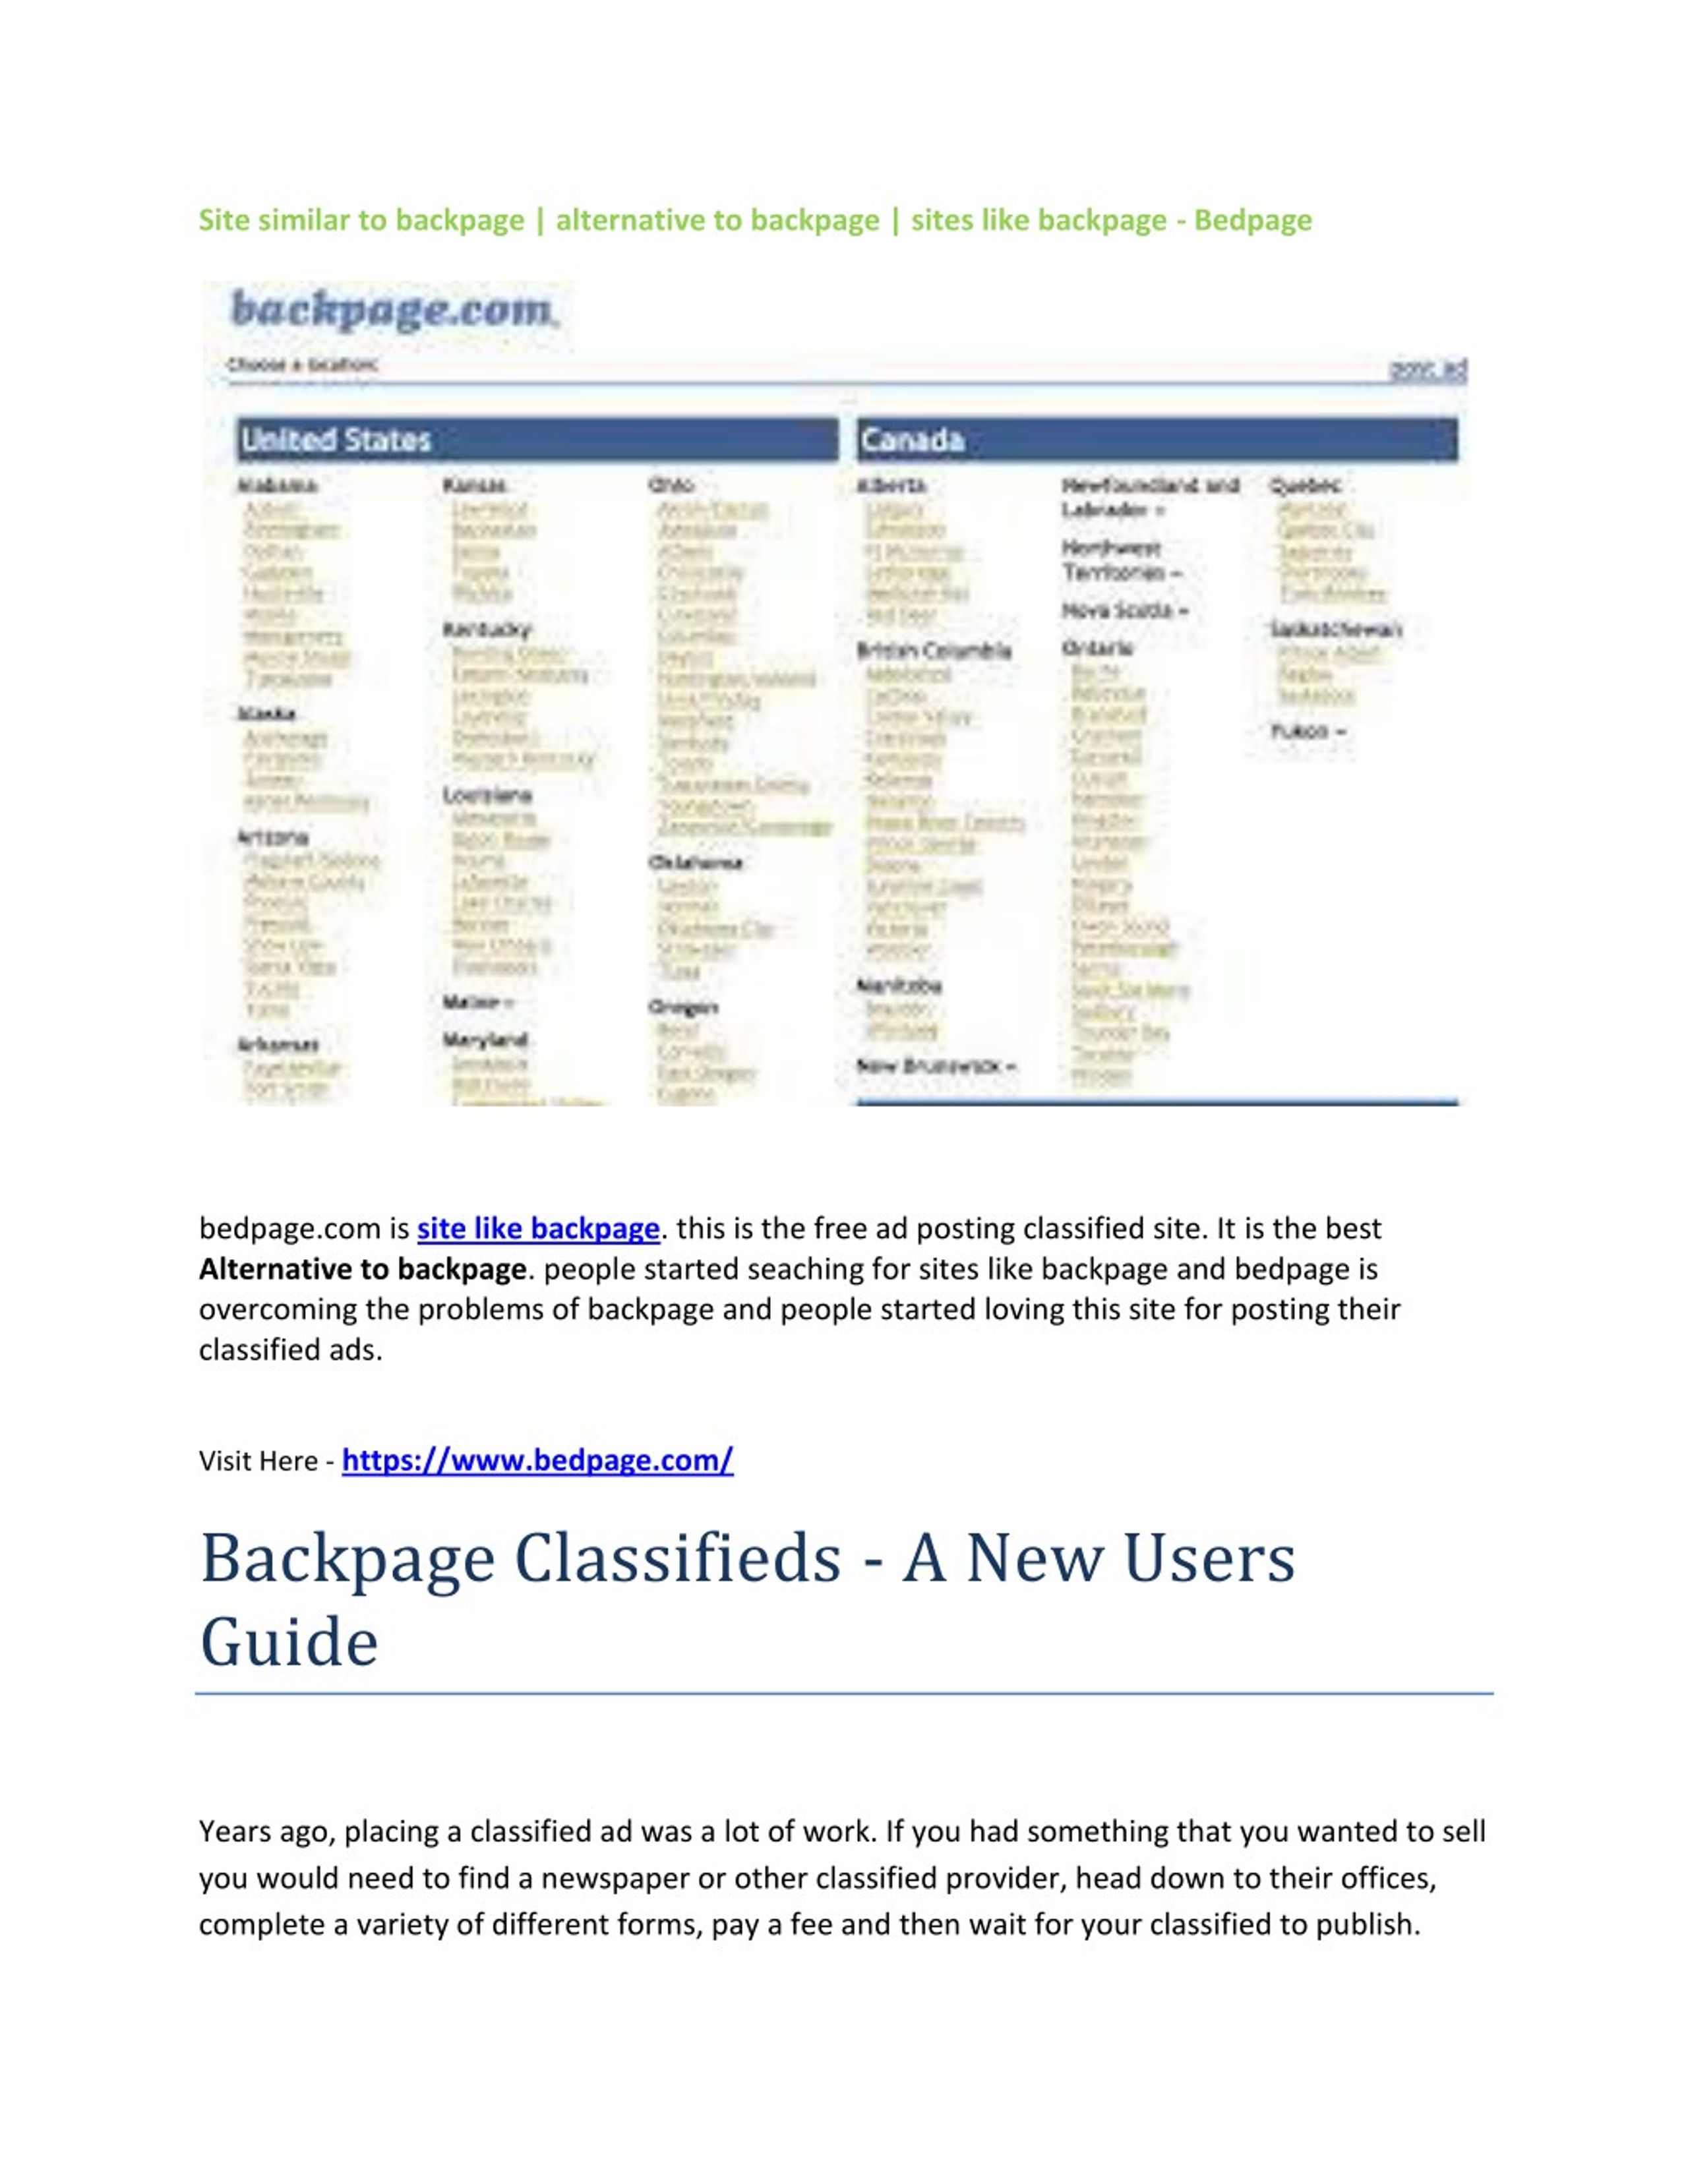 Sites like other what backpage are 12 Best